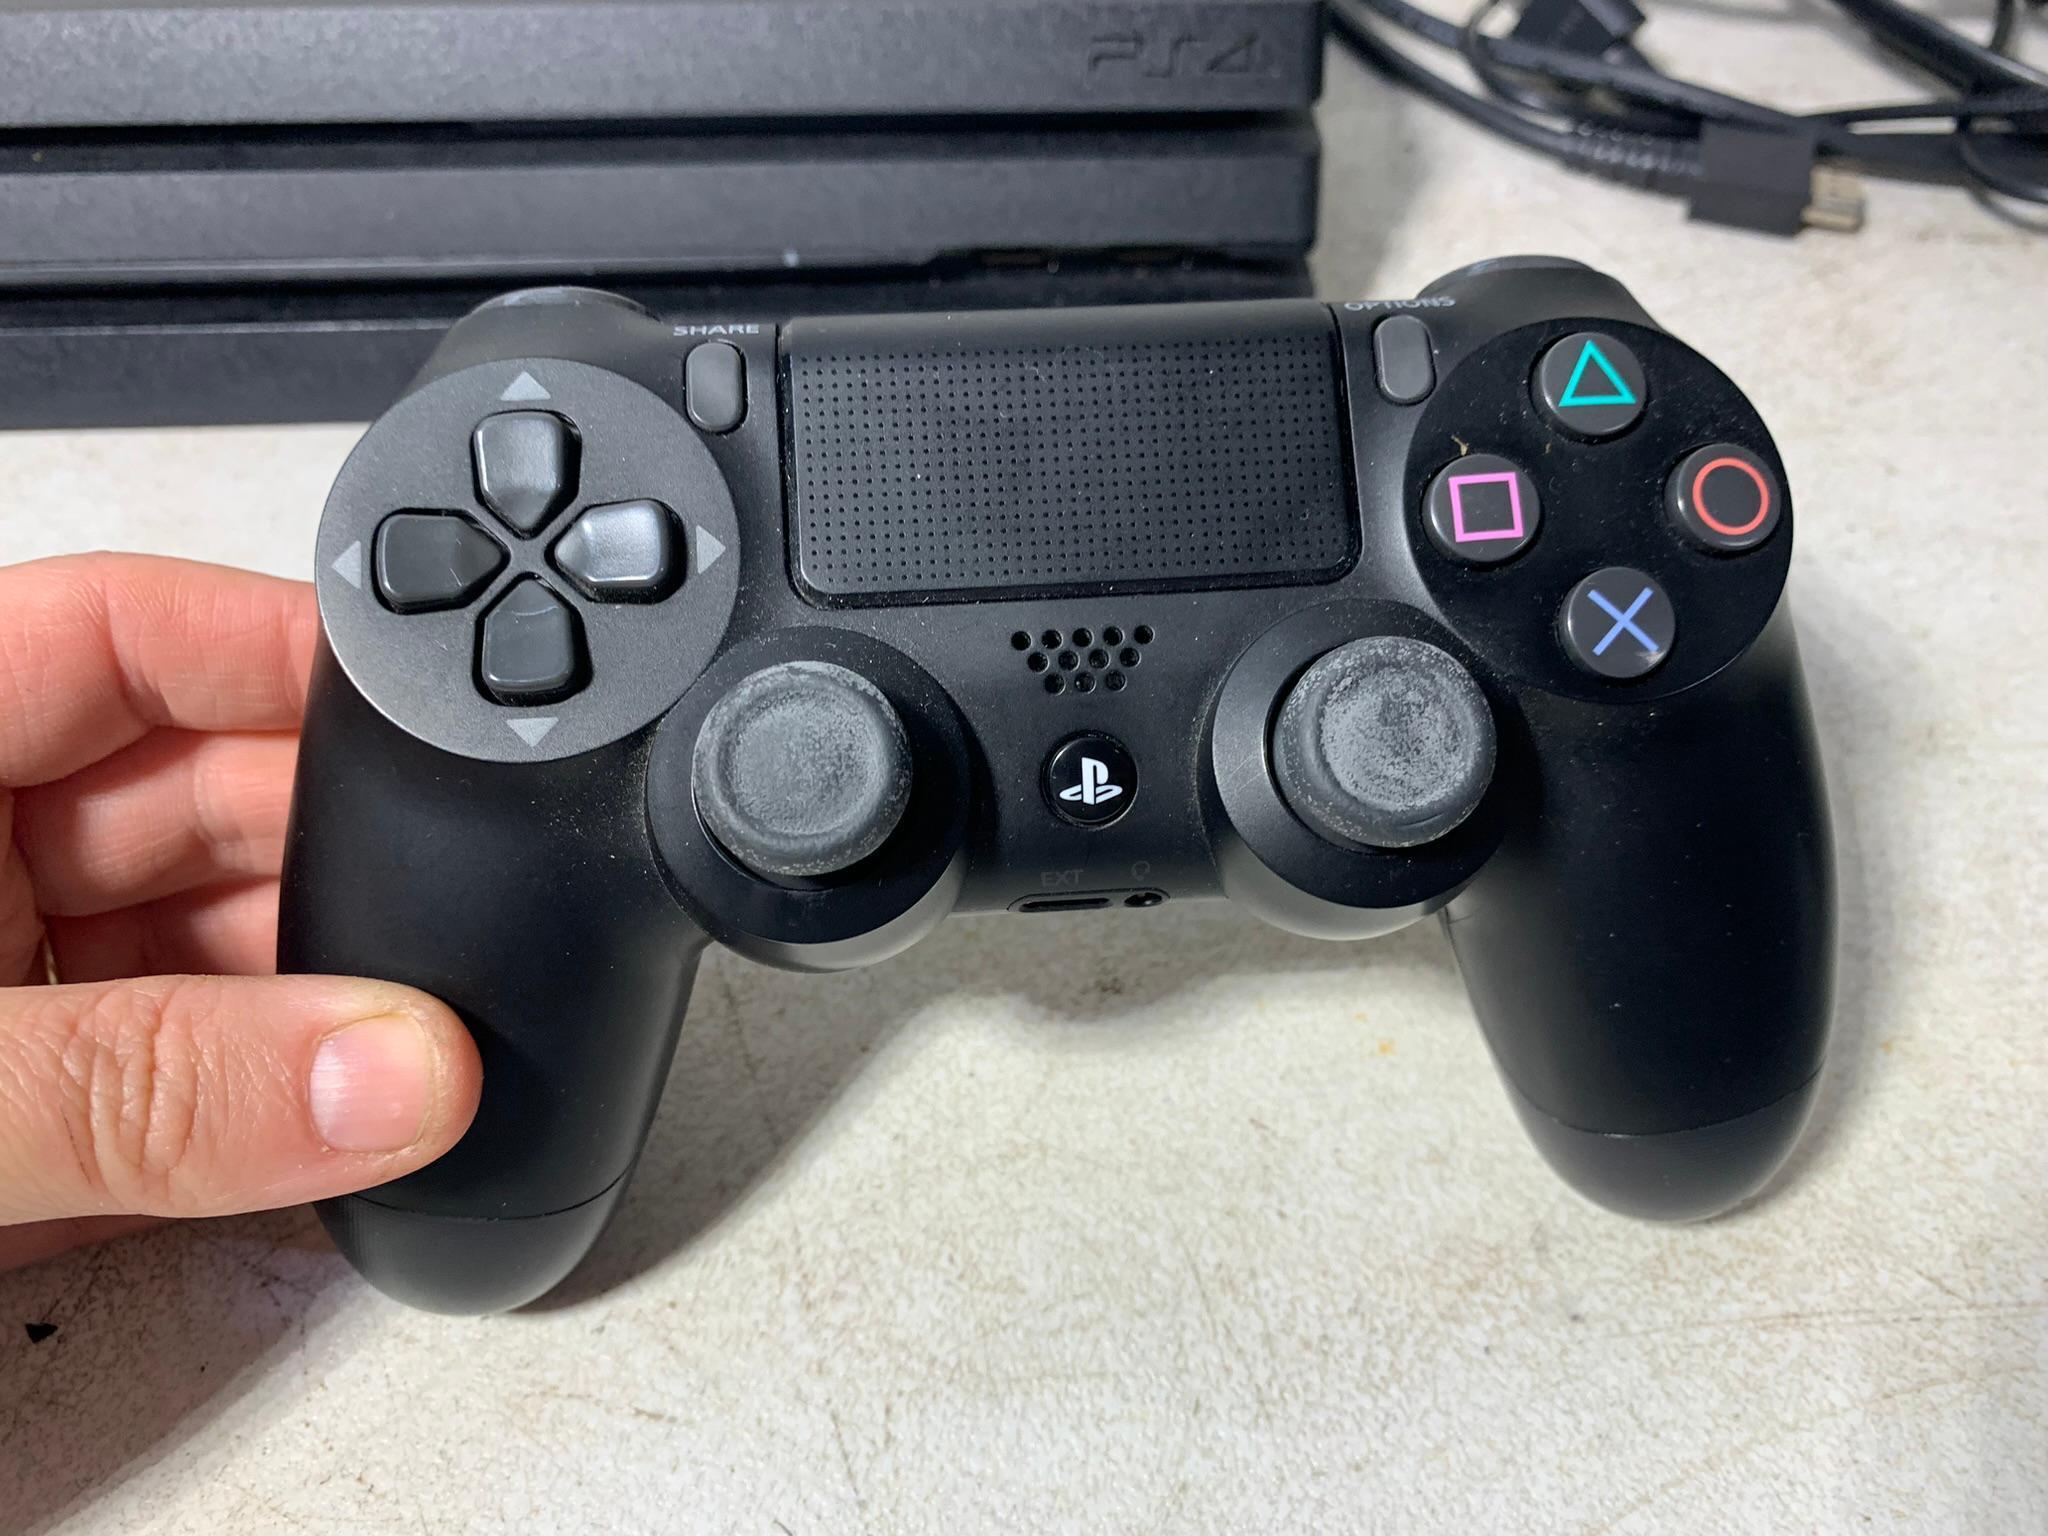 Sony PS4 Console with Controller and Cords